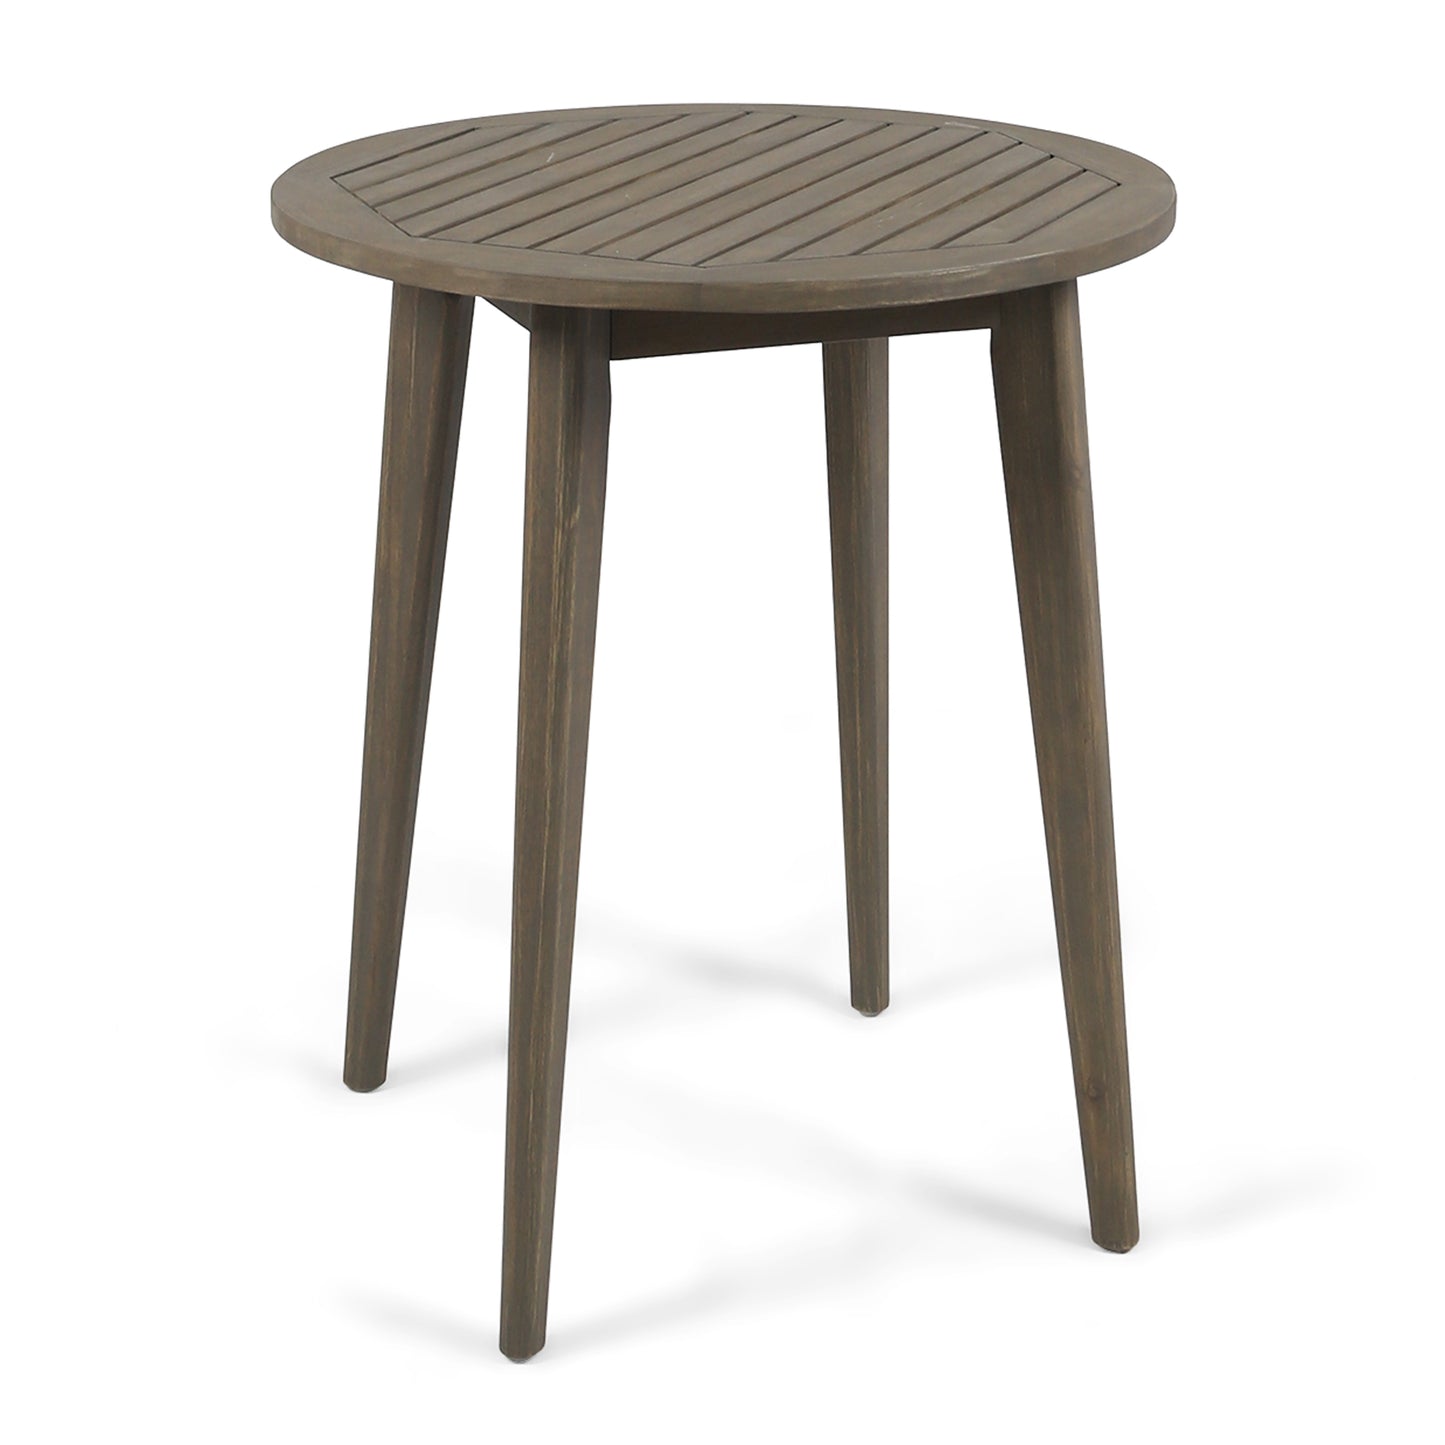 Fitch Outdoor Round Acacia Wood Bistro Table, Gray